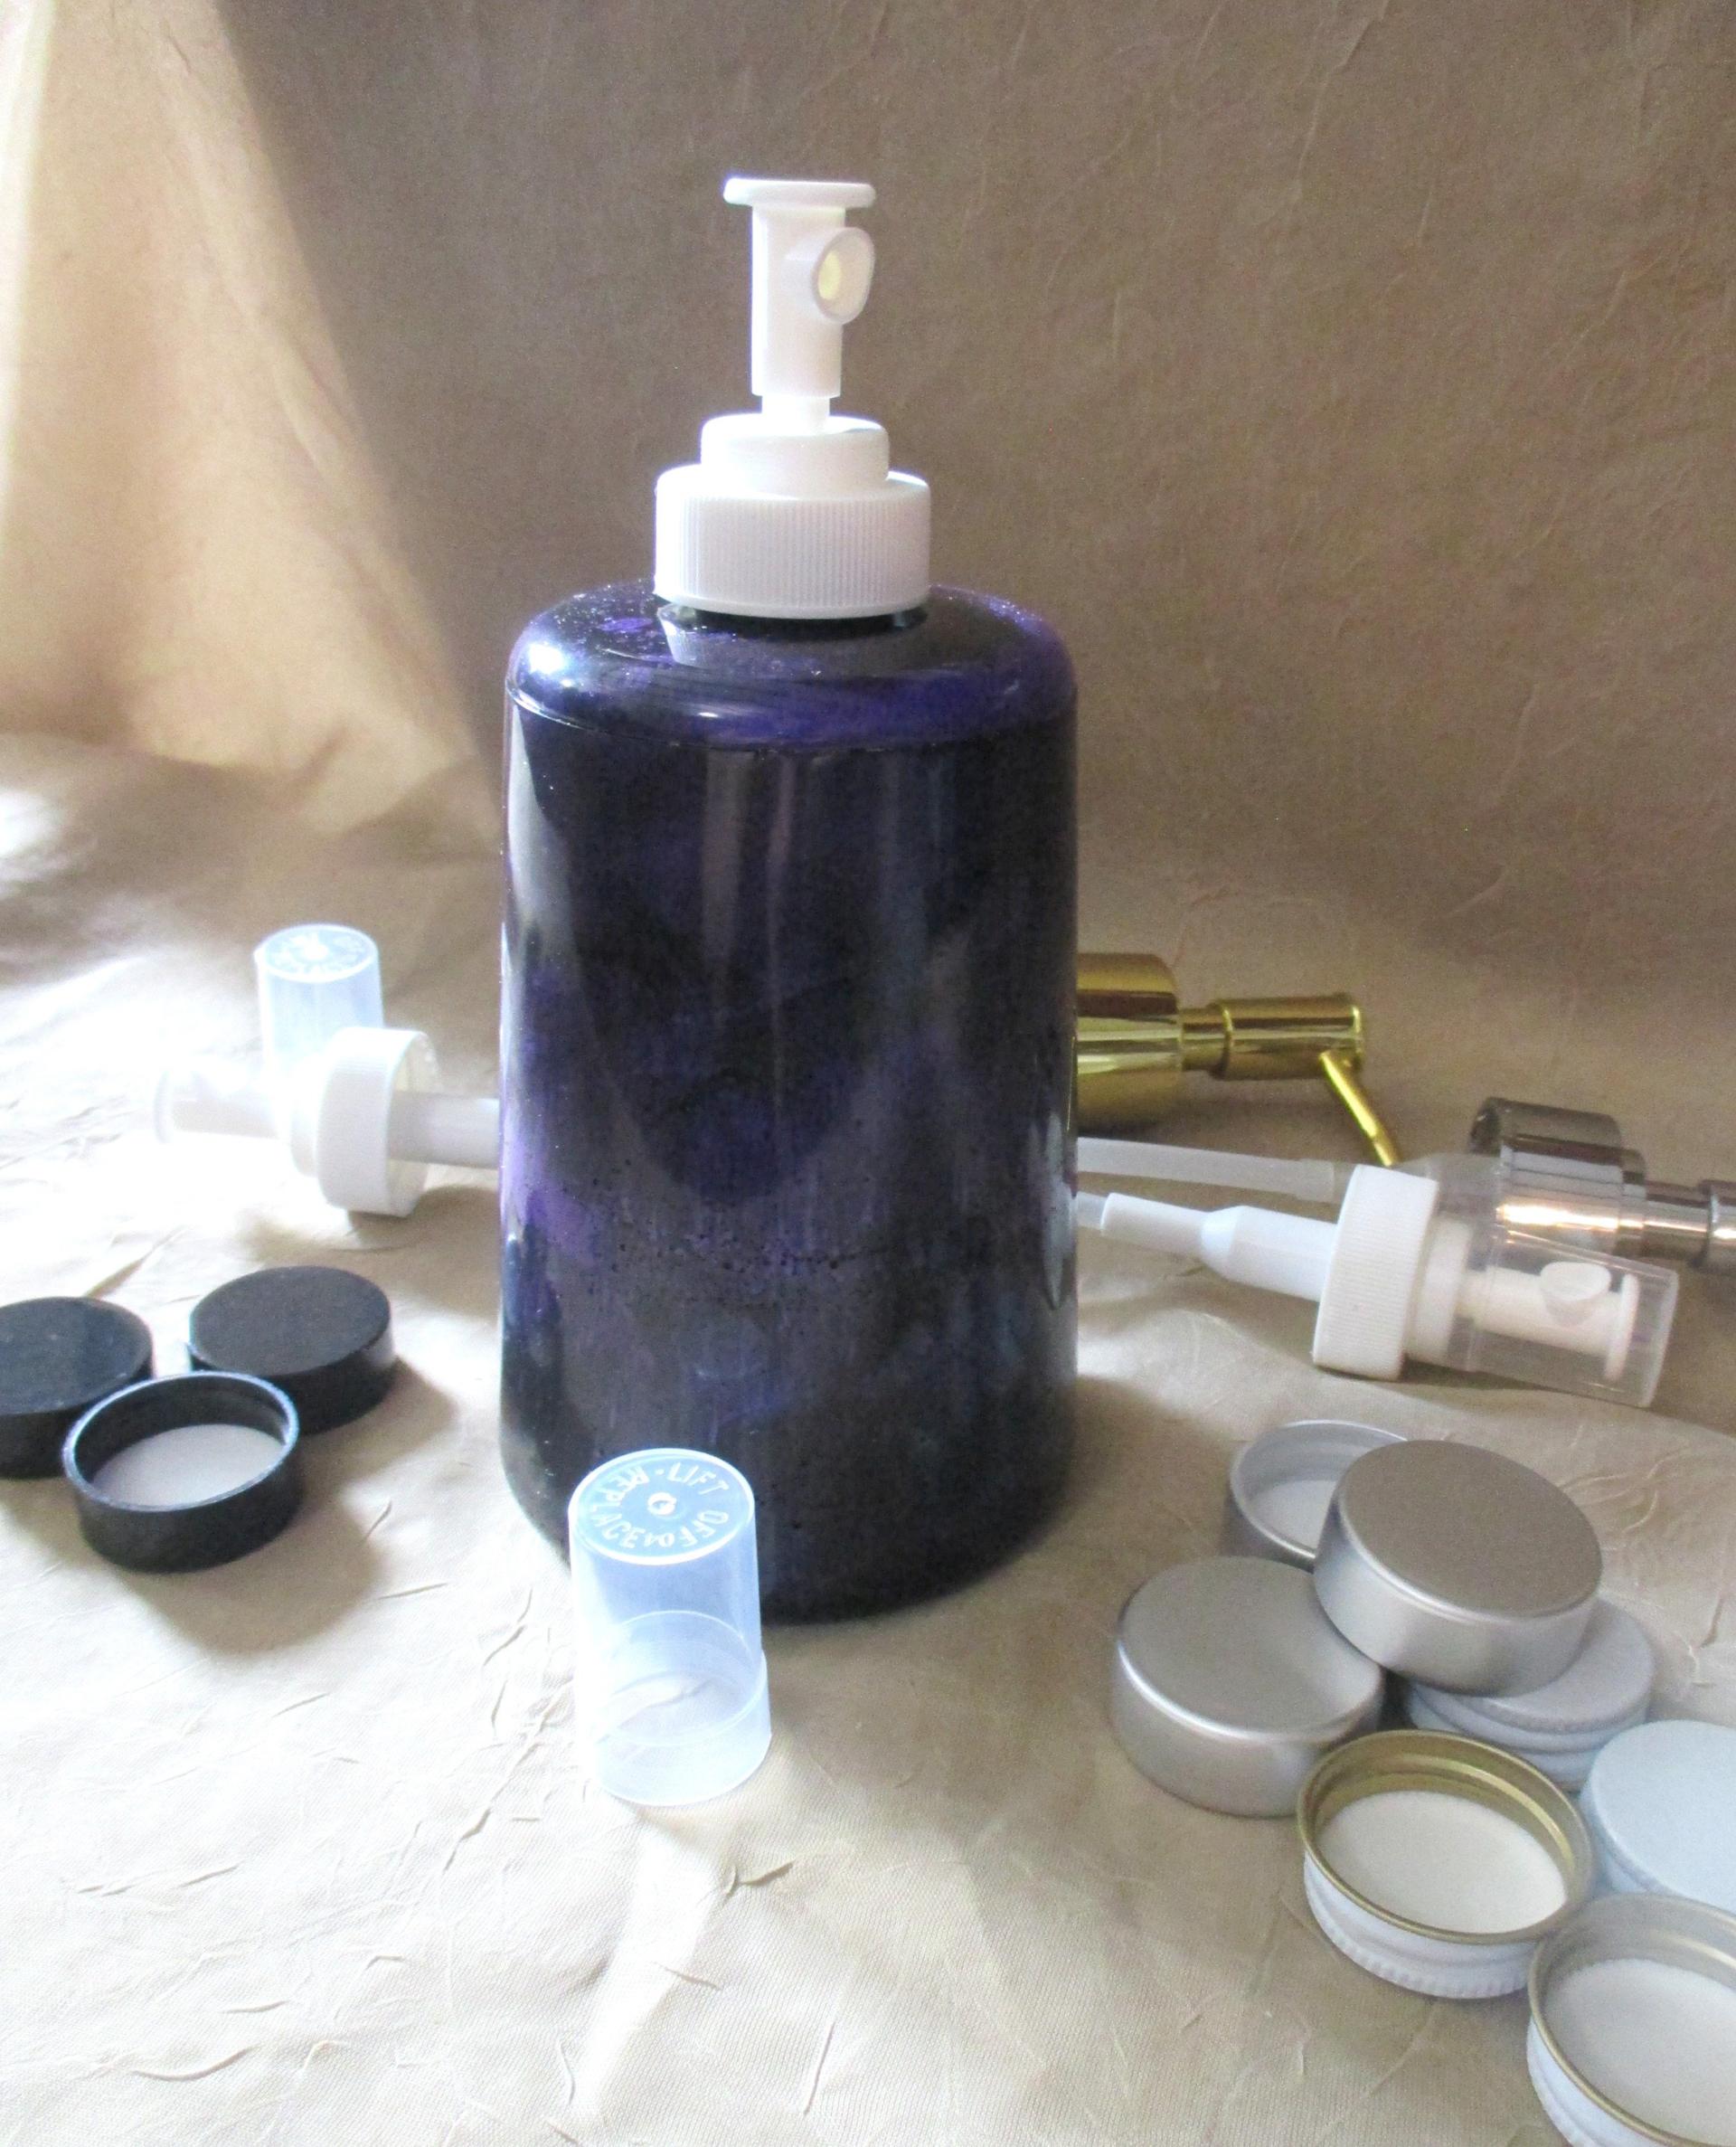 Mold - Large Bottle Casting Mold - for Epoxy, Clay or other casting medium - Lotion, Soap, or Shampoo - Decorative Bottle